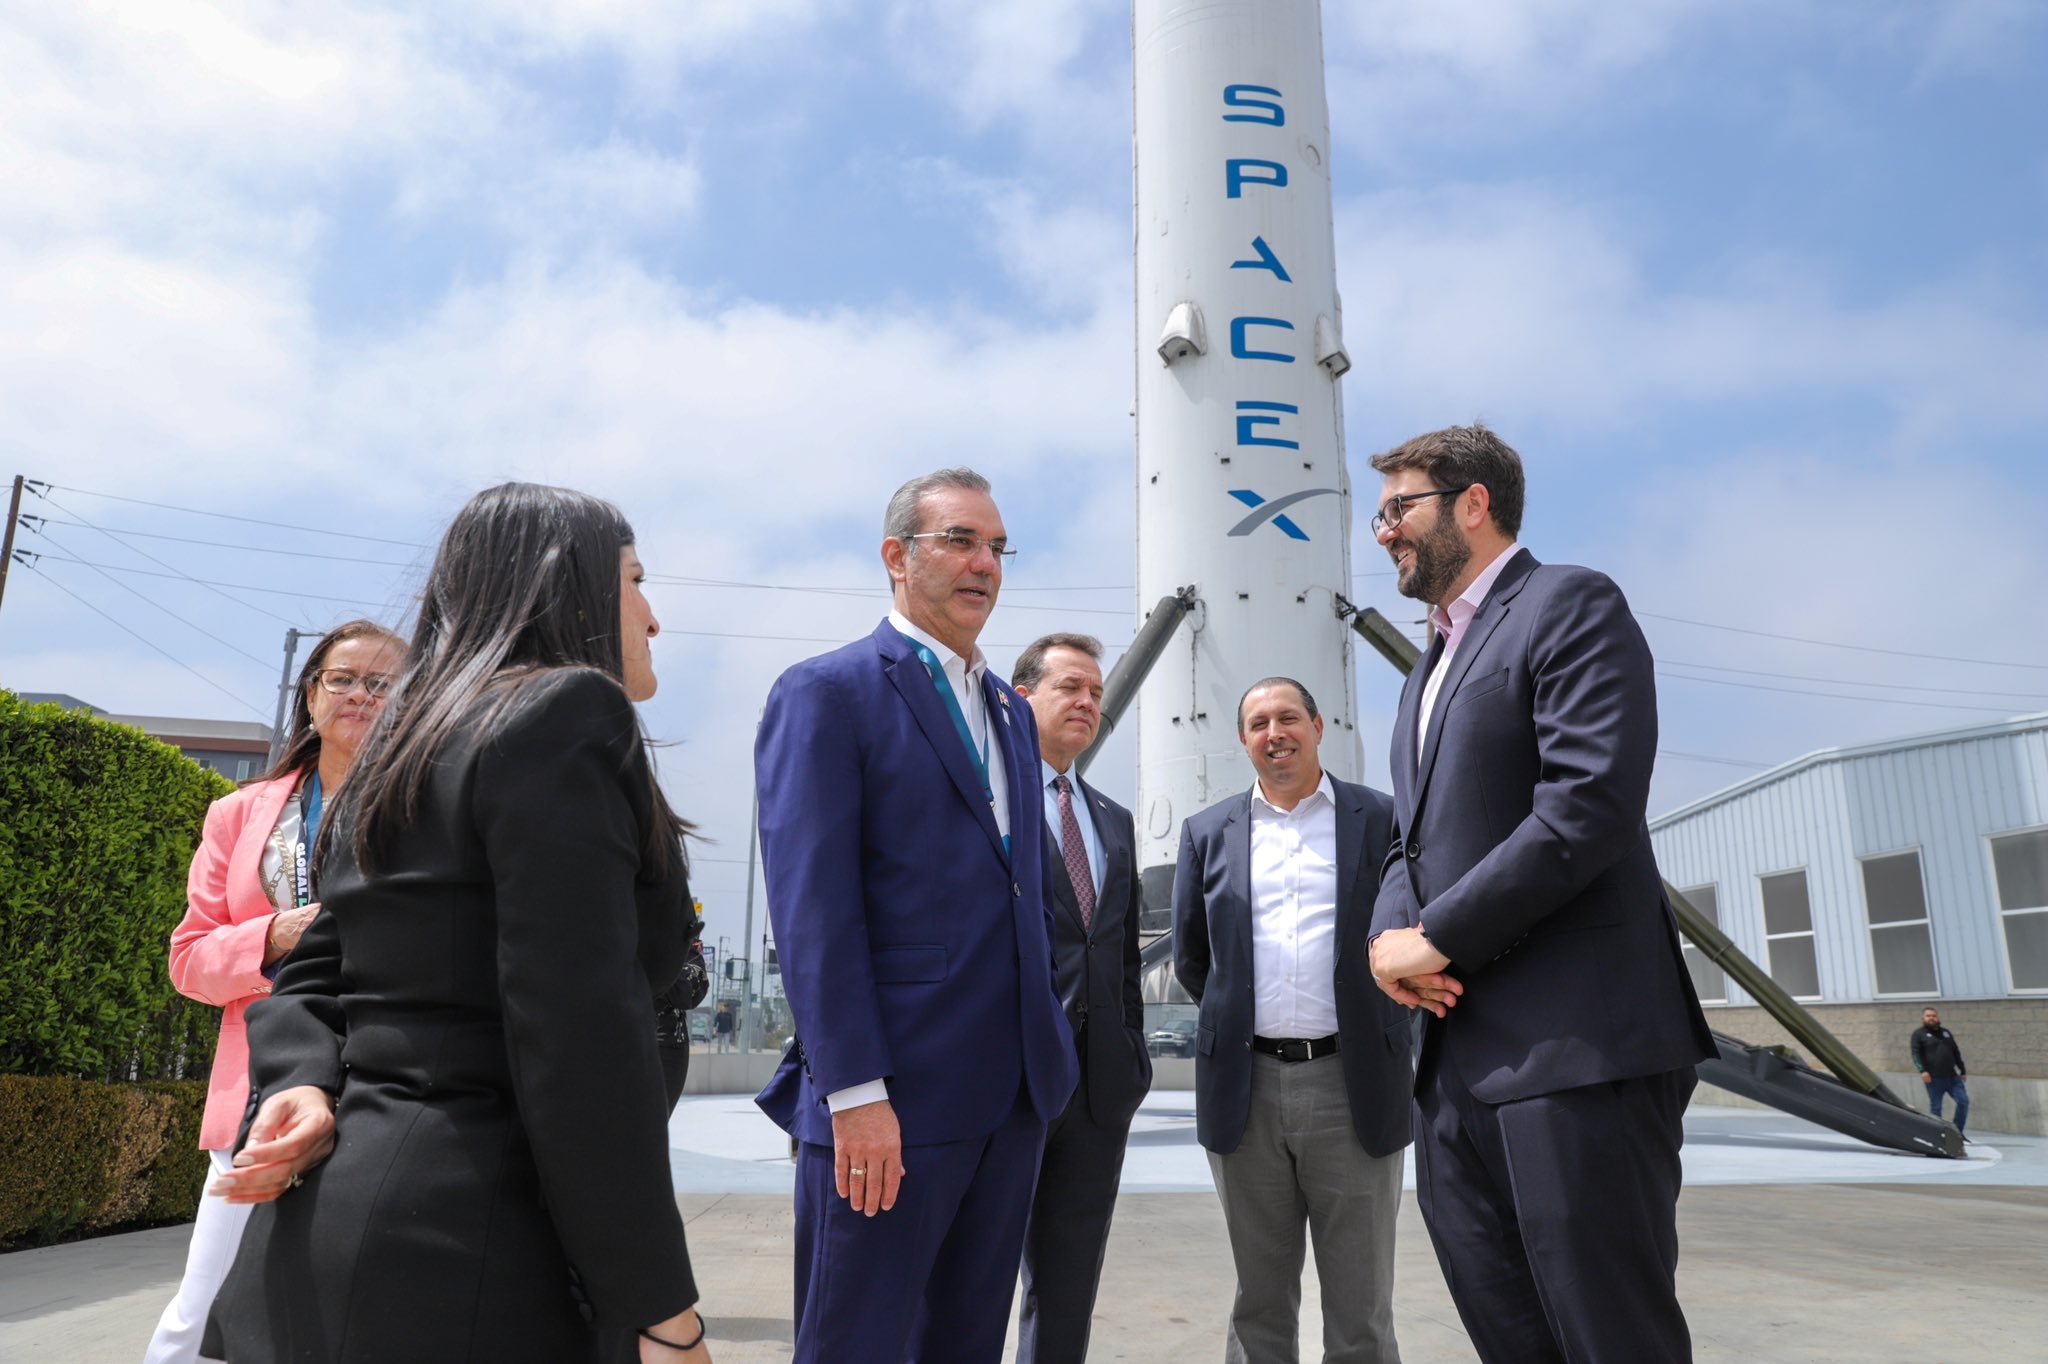 Starlink Is Now Available In The Caribbean After Dominican Republic President's Visit To SpaceX Headquarters